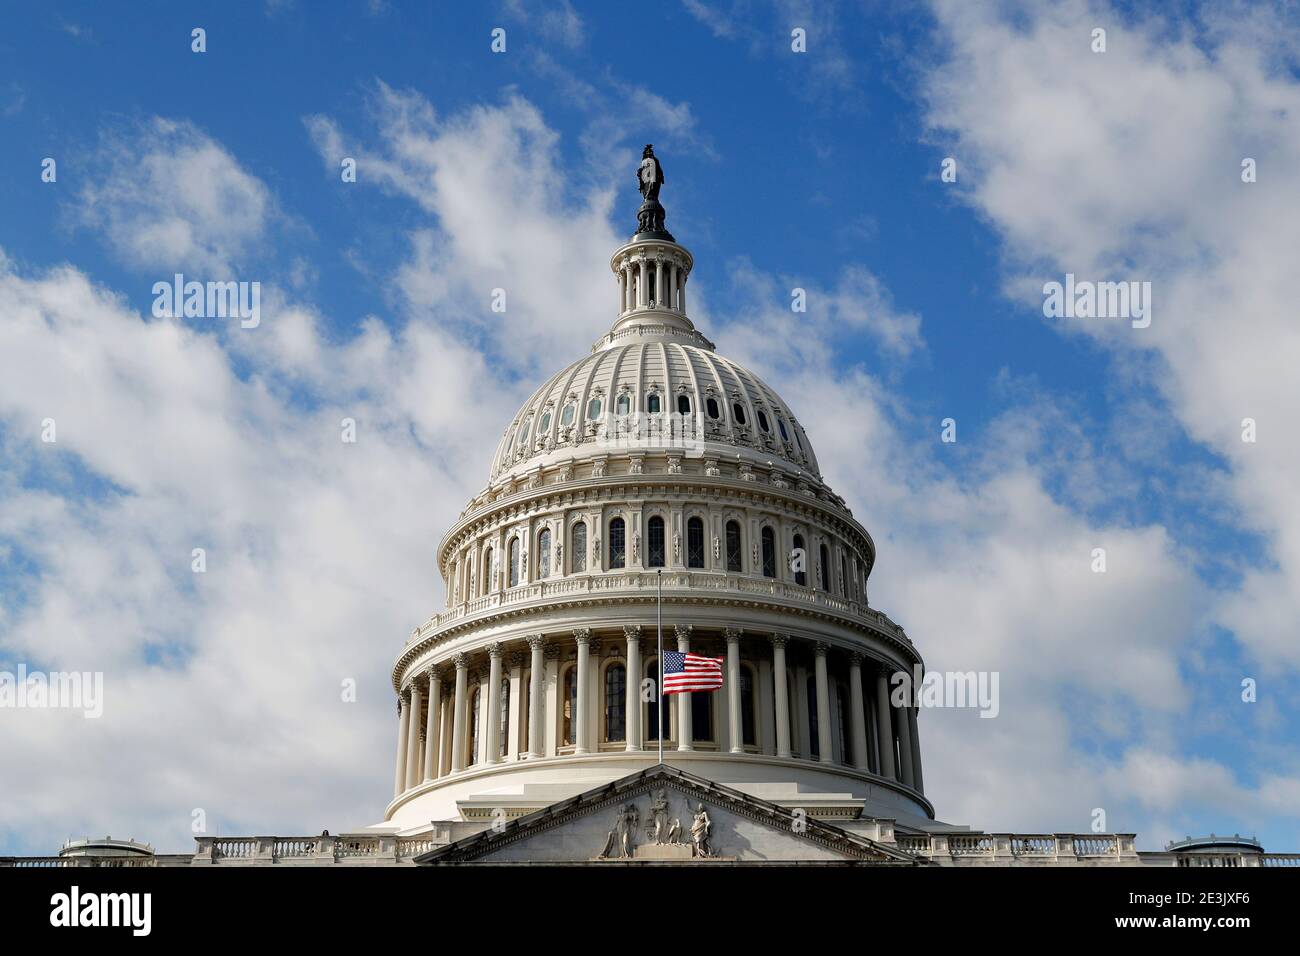 A U.S. flag flies at half-mast for a police officer who died following the Capitol riots in Washington, U.S. January 19, 2021. REUTERS/Mike Segar Stock Photo